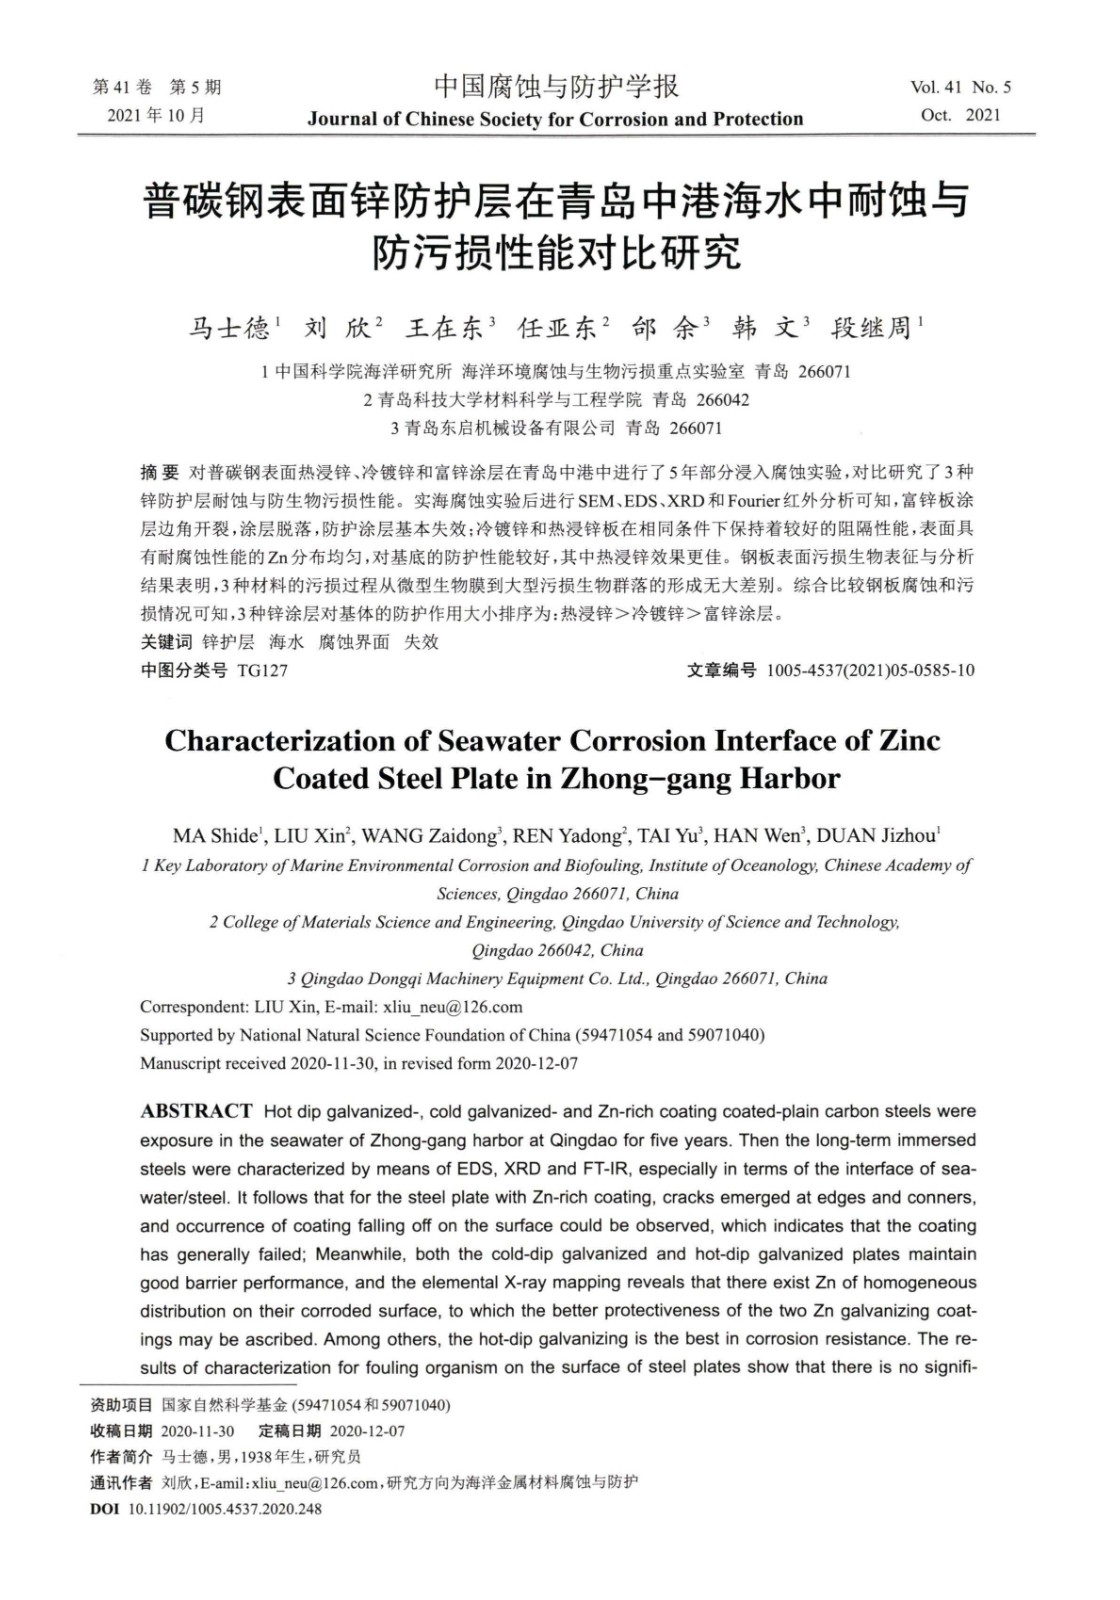 Characterization of Seawater Corrosion Interface of Zinc Coated Steel Plate in Zhong-gang Harbor